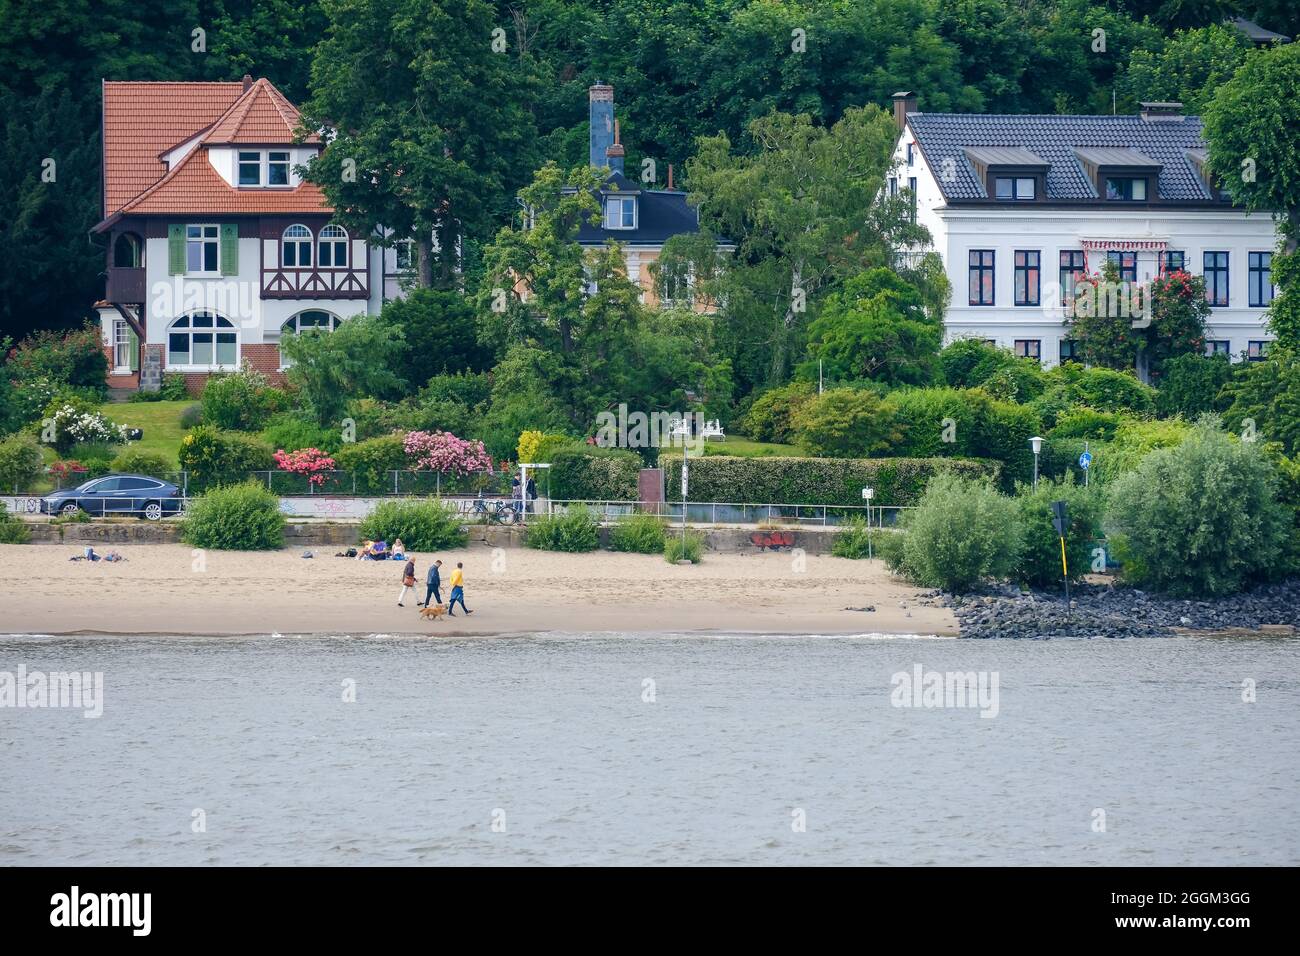 Hamburg, Germany - Residential houses on the sandy Elbe beach in the affluent residential area in Othmarschen. Stock Photo